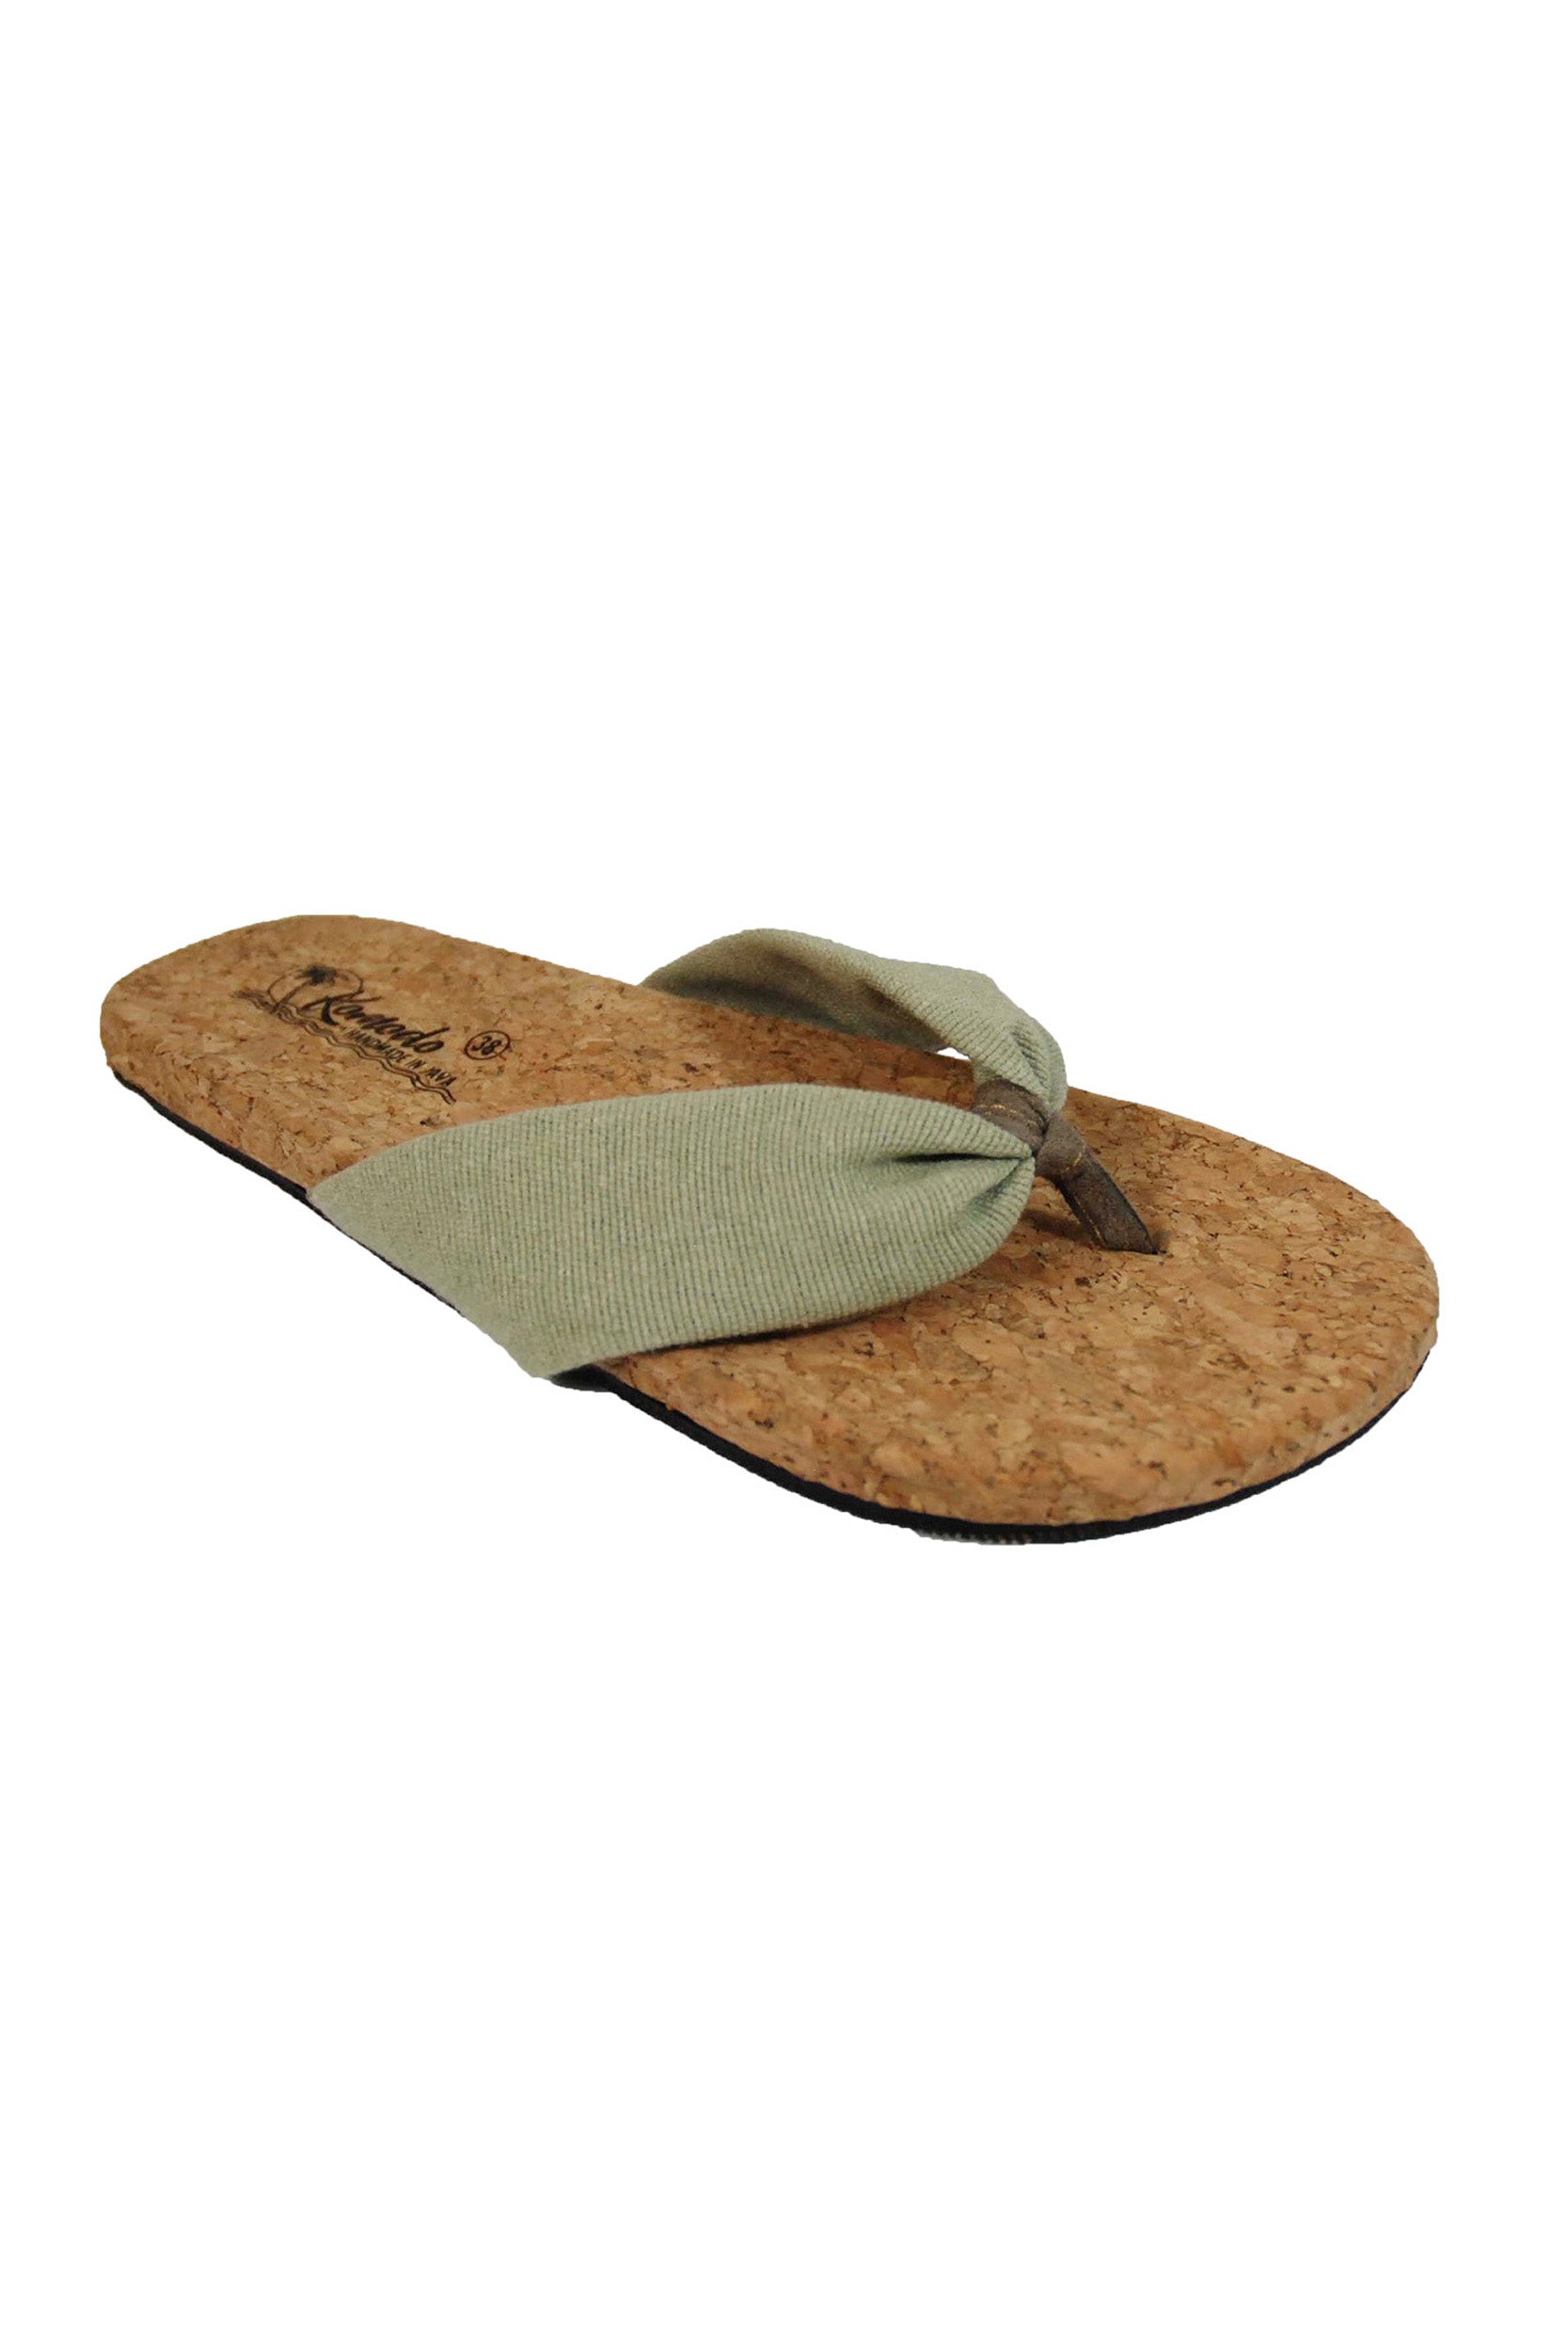 CUPID Thong Flip Flop - Stone